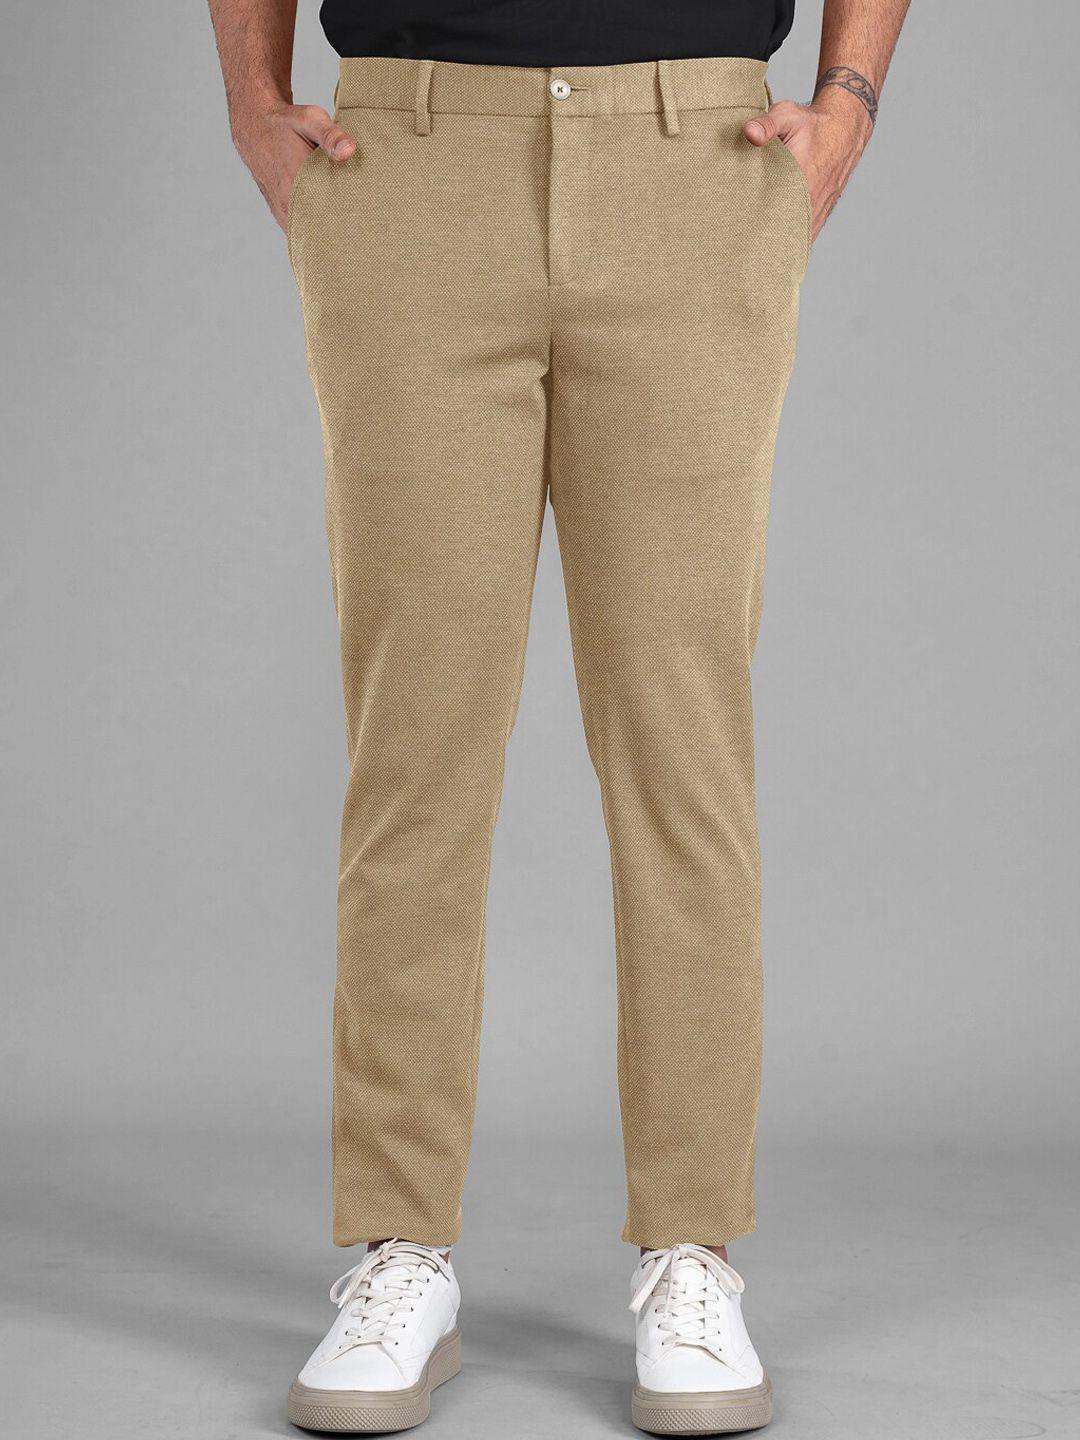 the pant project men mid-rise tailored slim fit wrinkle free trousers